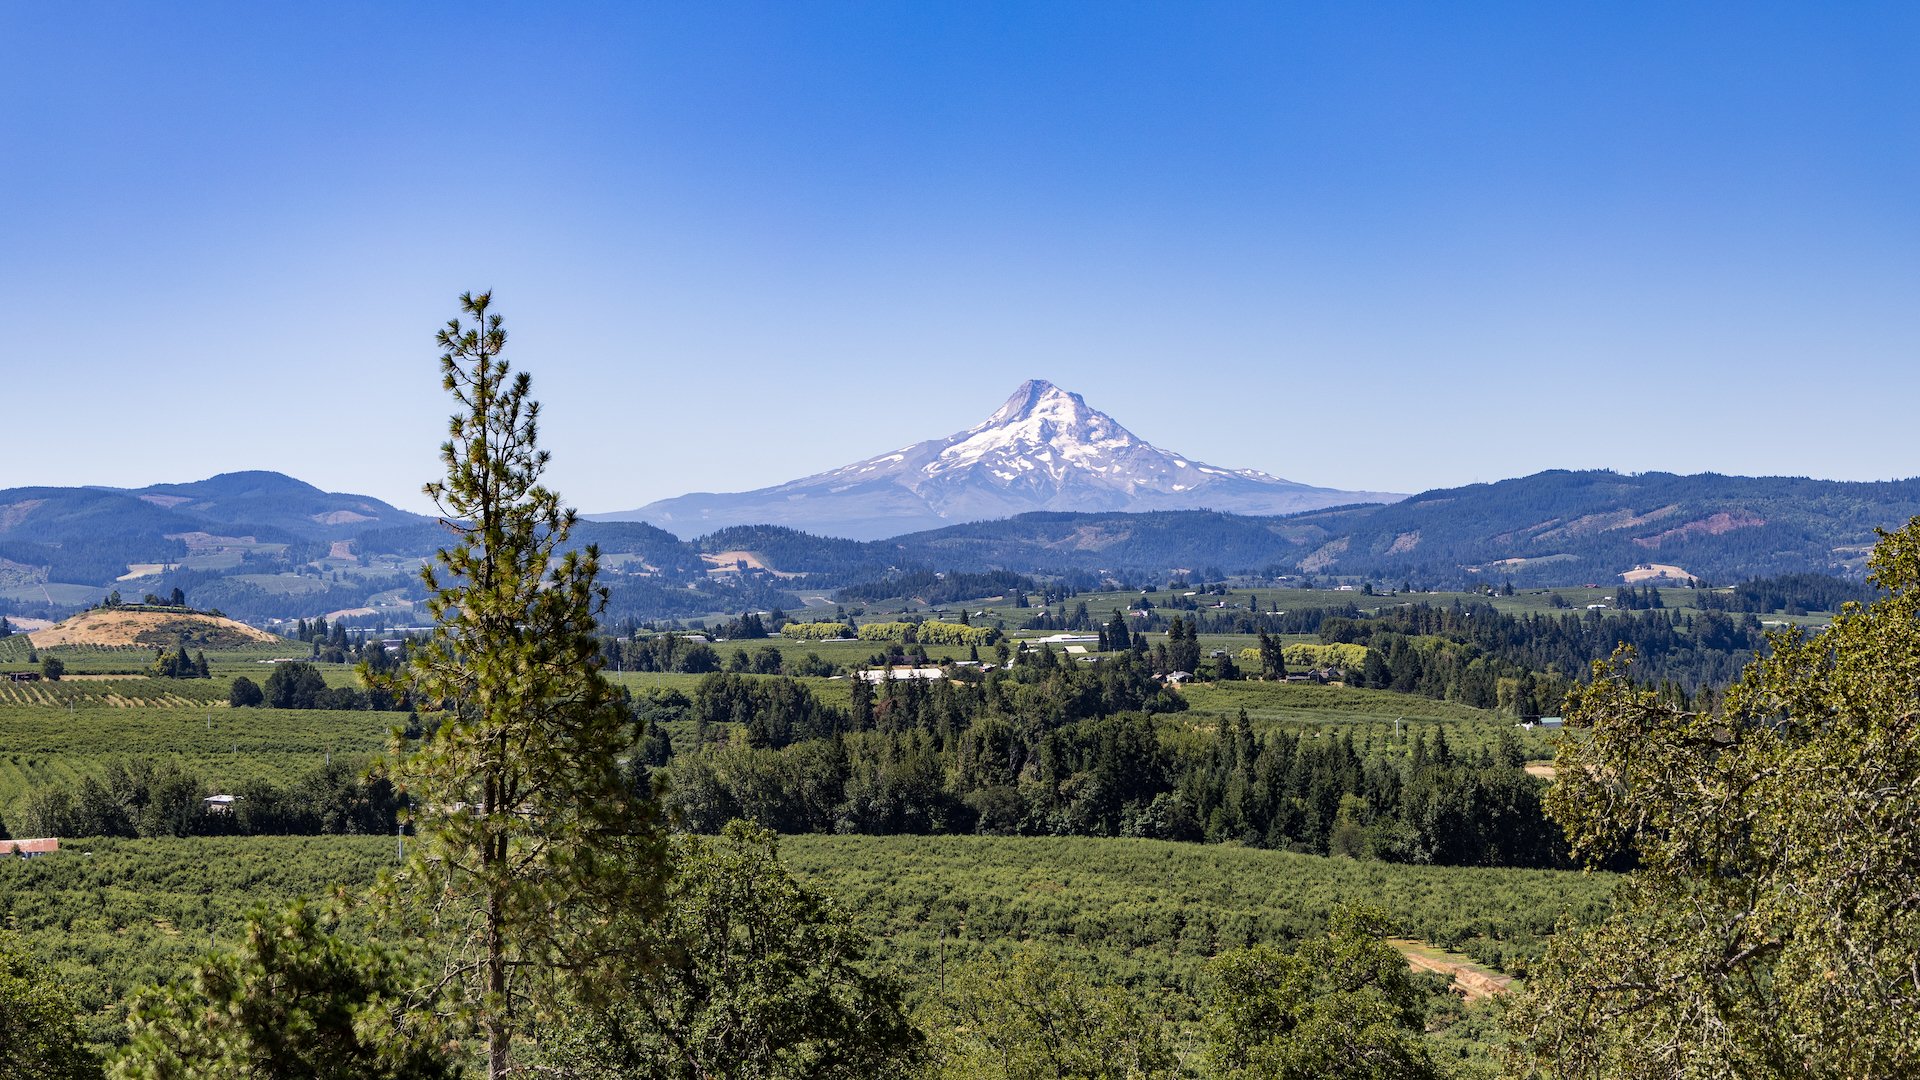  A few views of Mount Hood, from Panorama Point. 